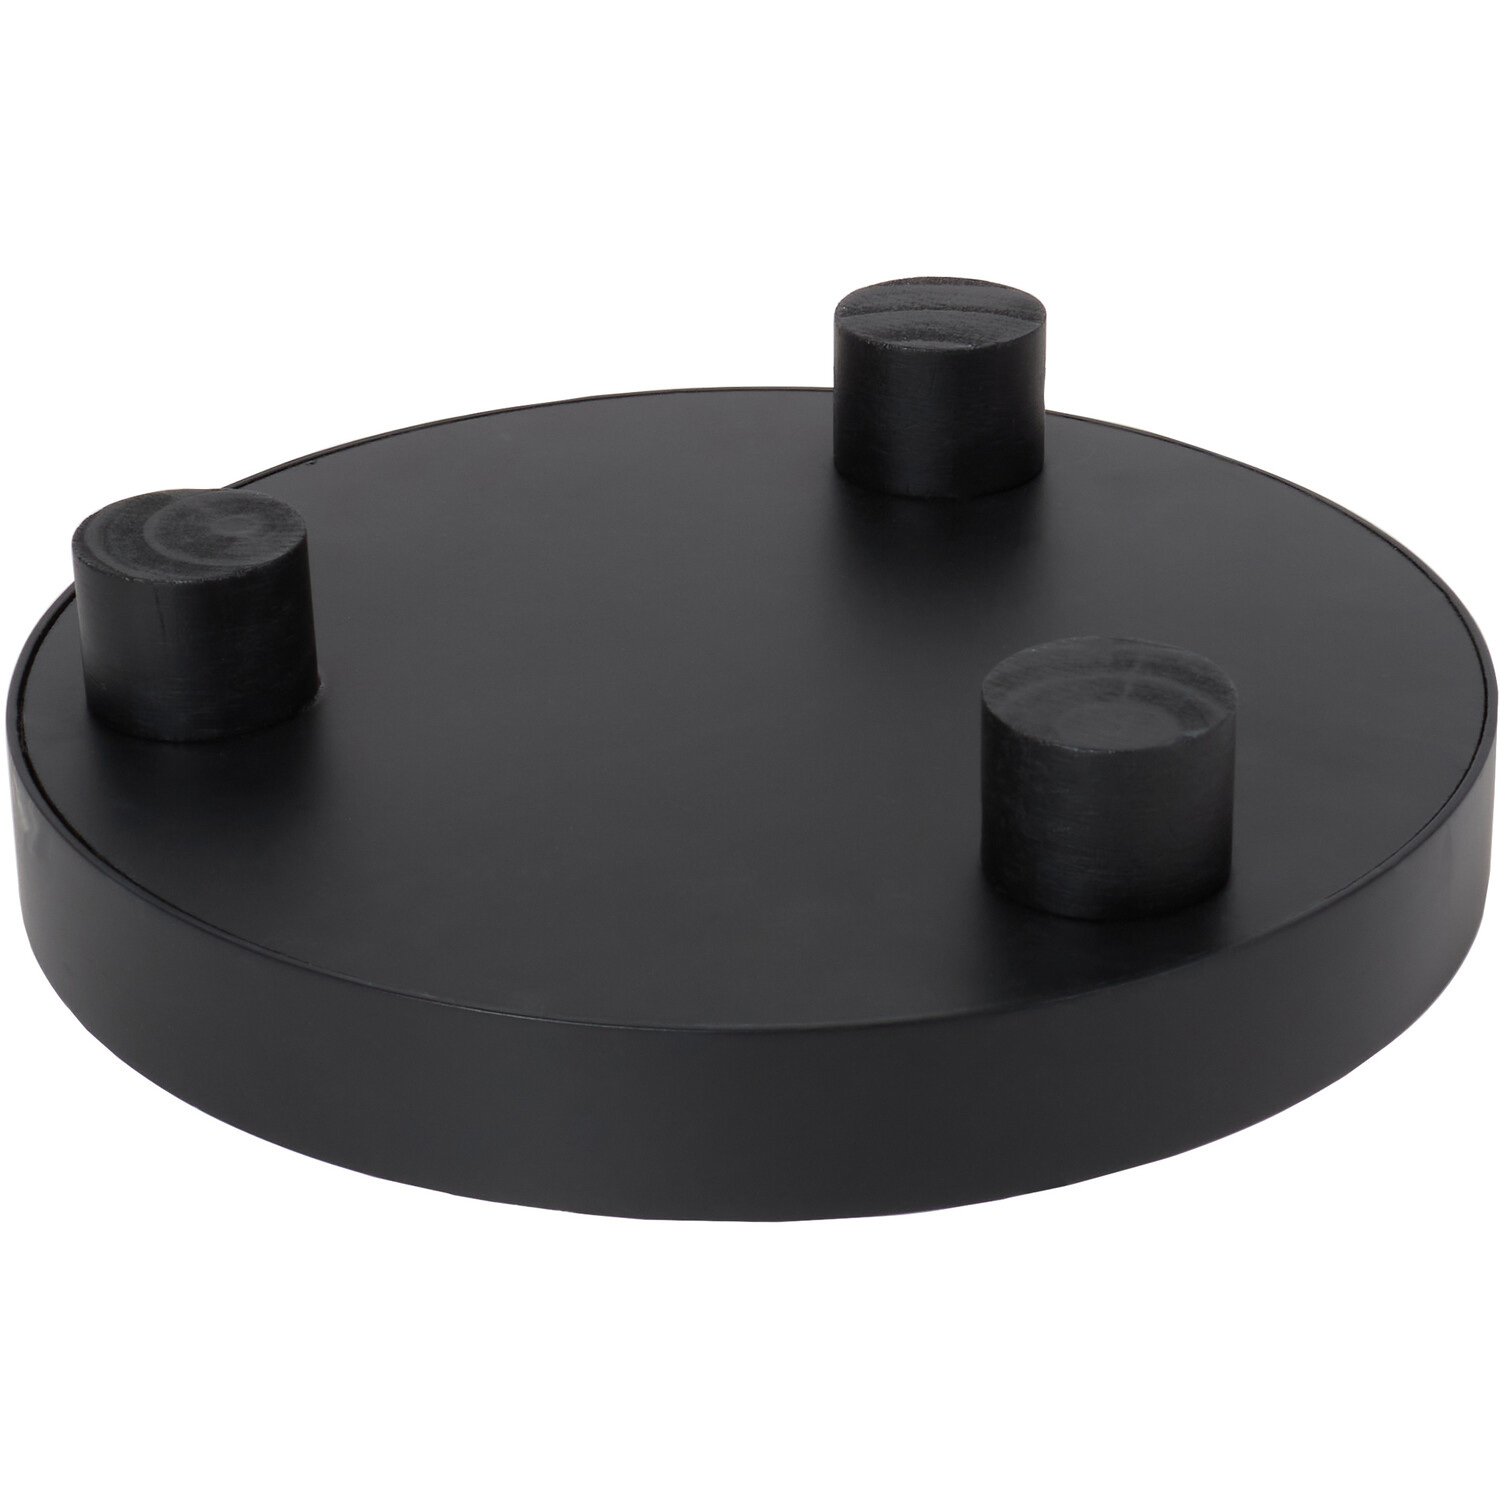 Footed Tray - Black Image 3